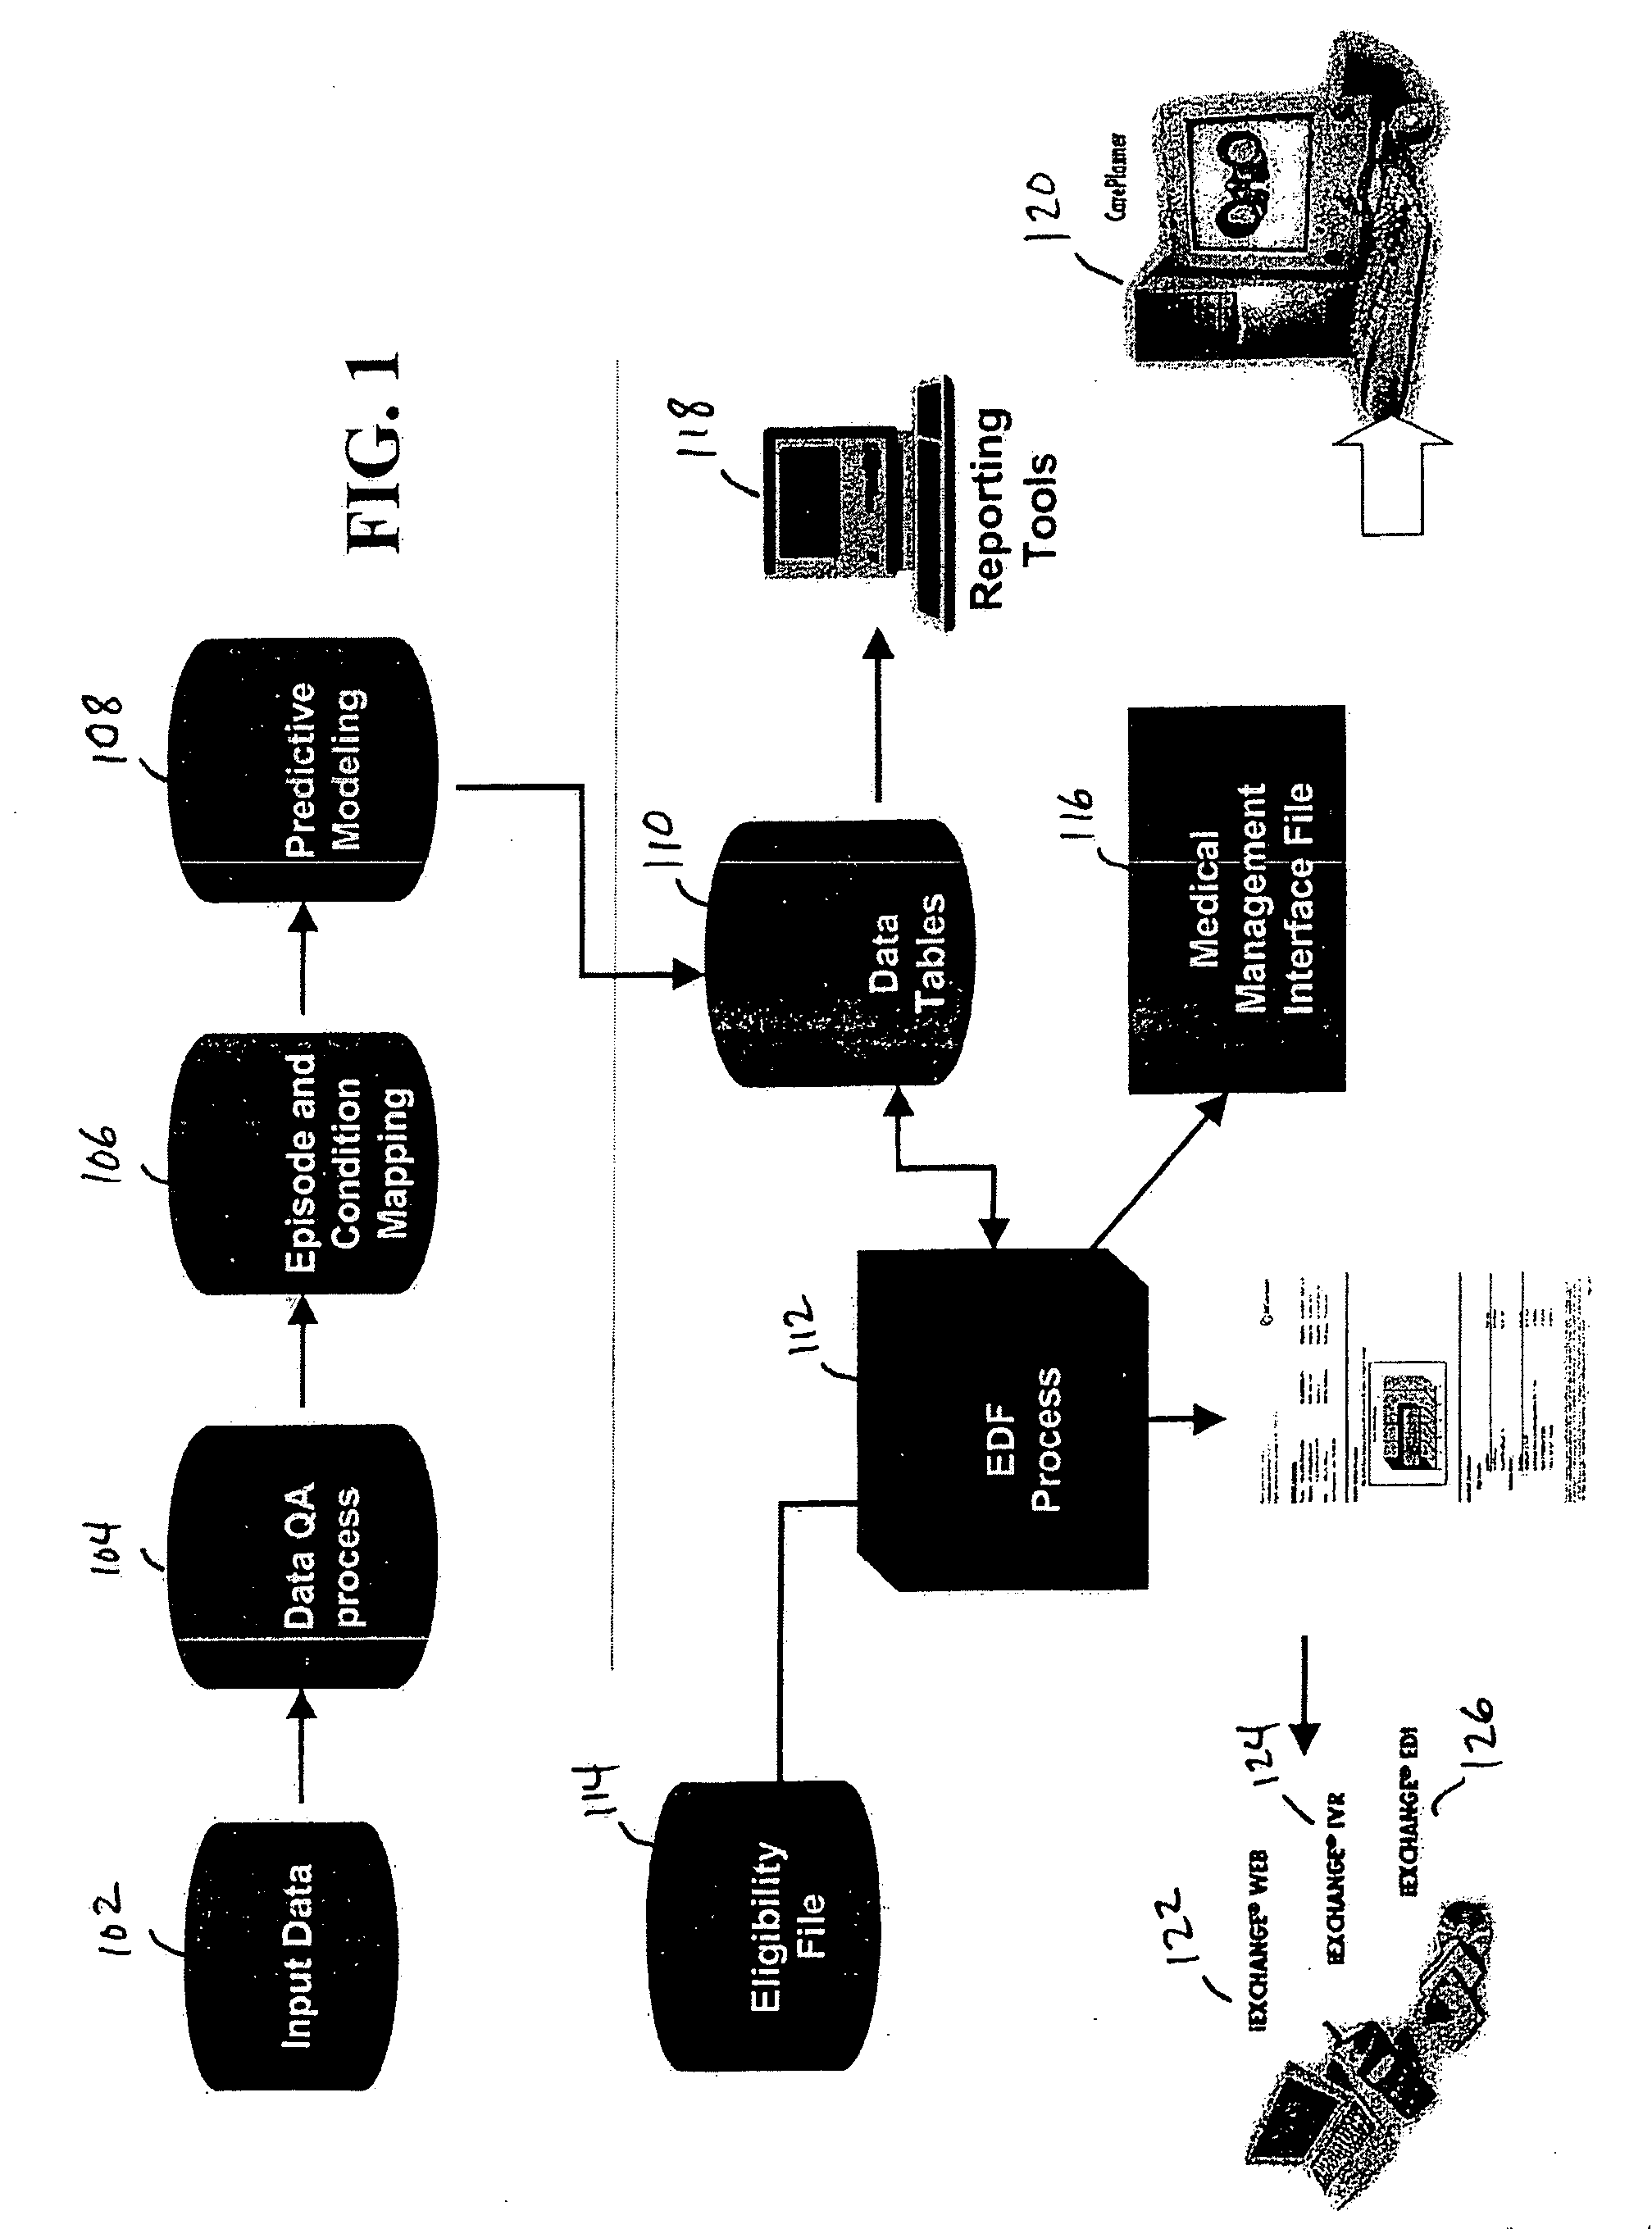 System and method for health care data integration and management